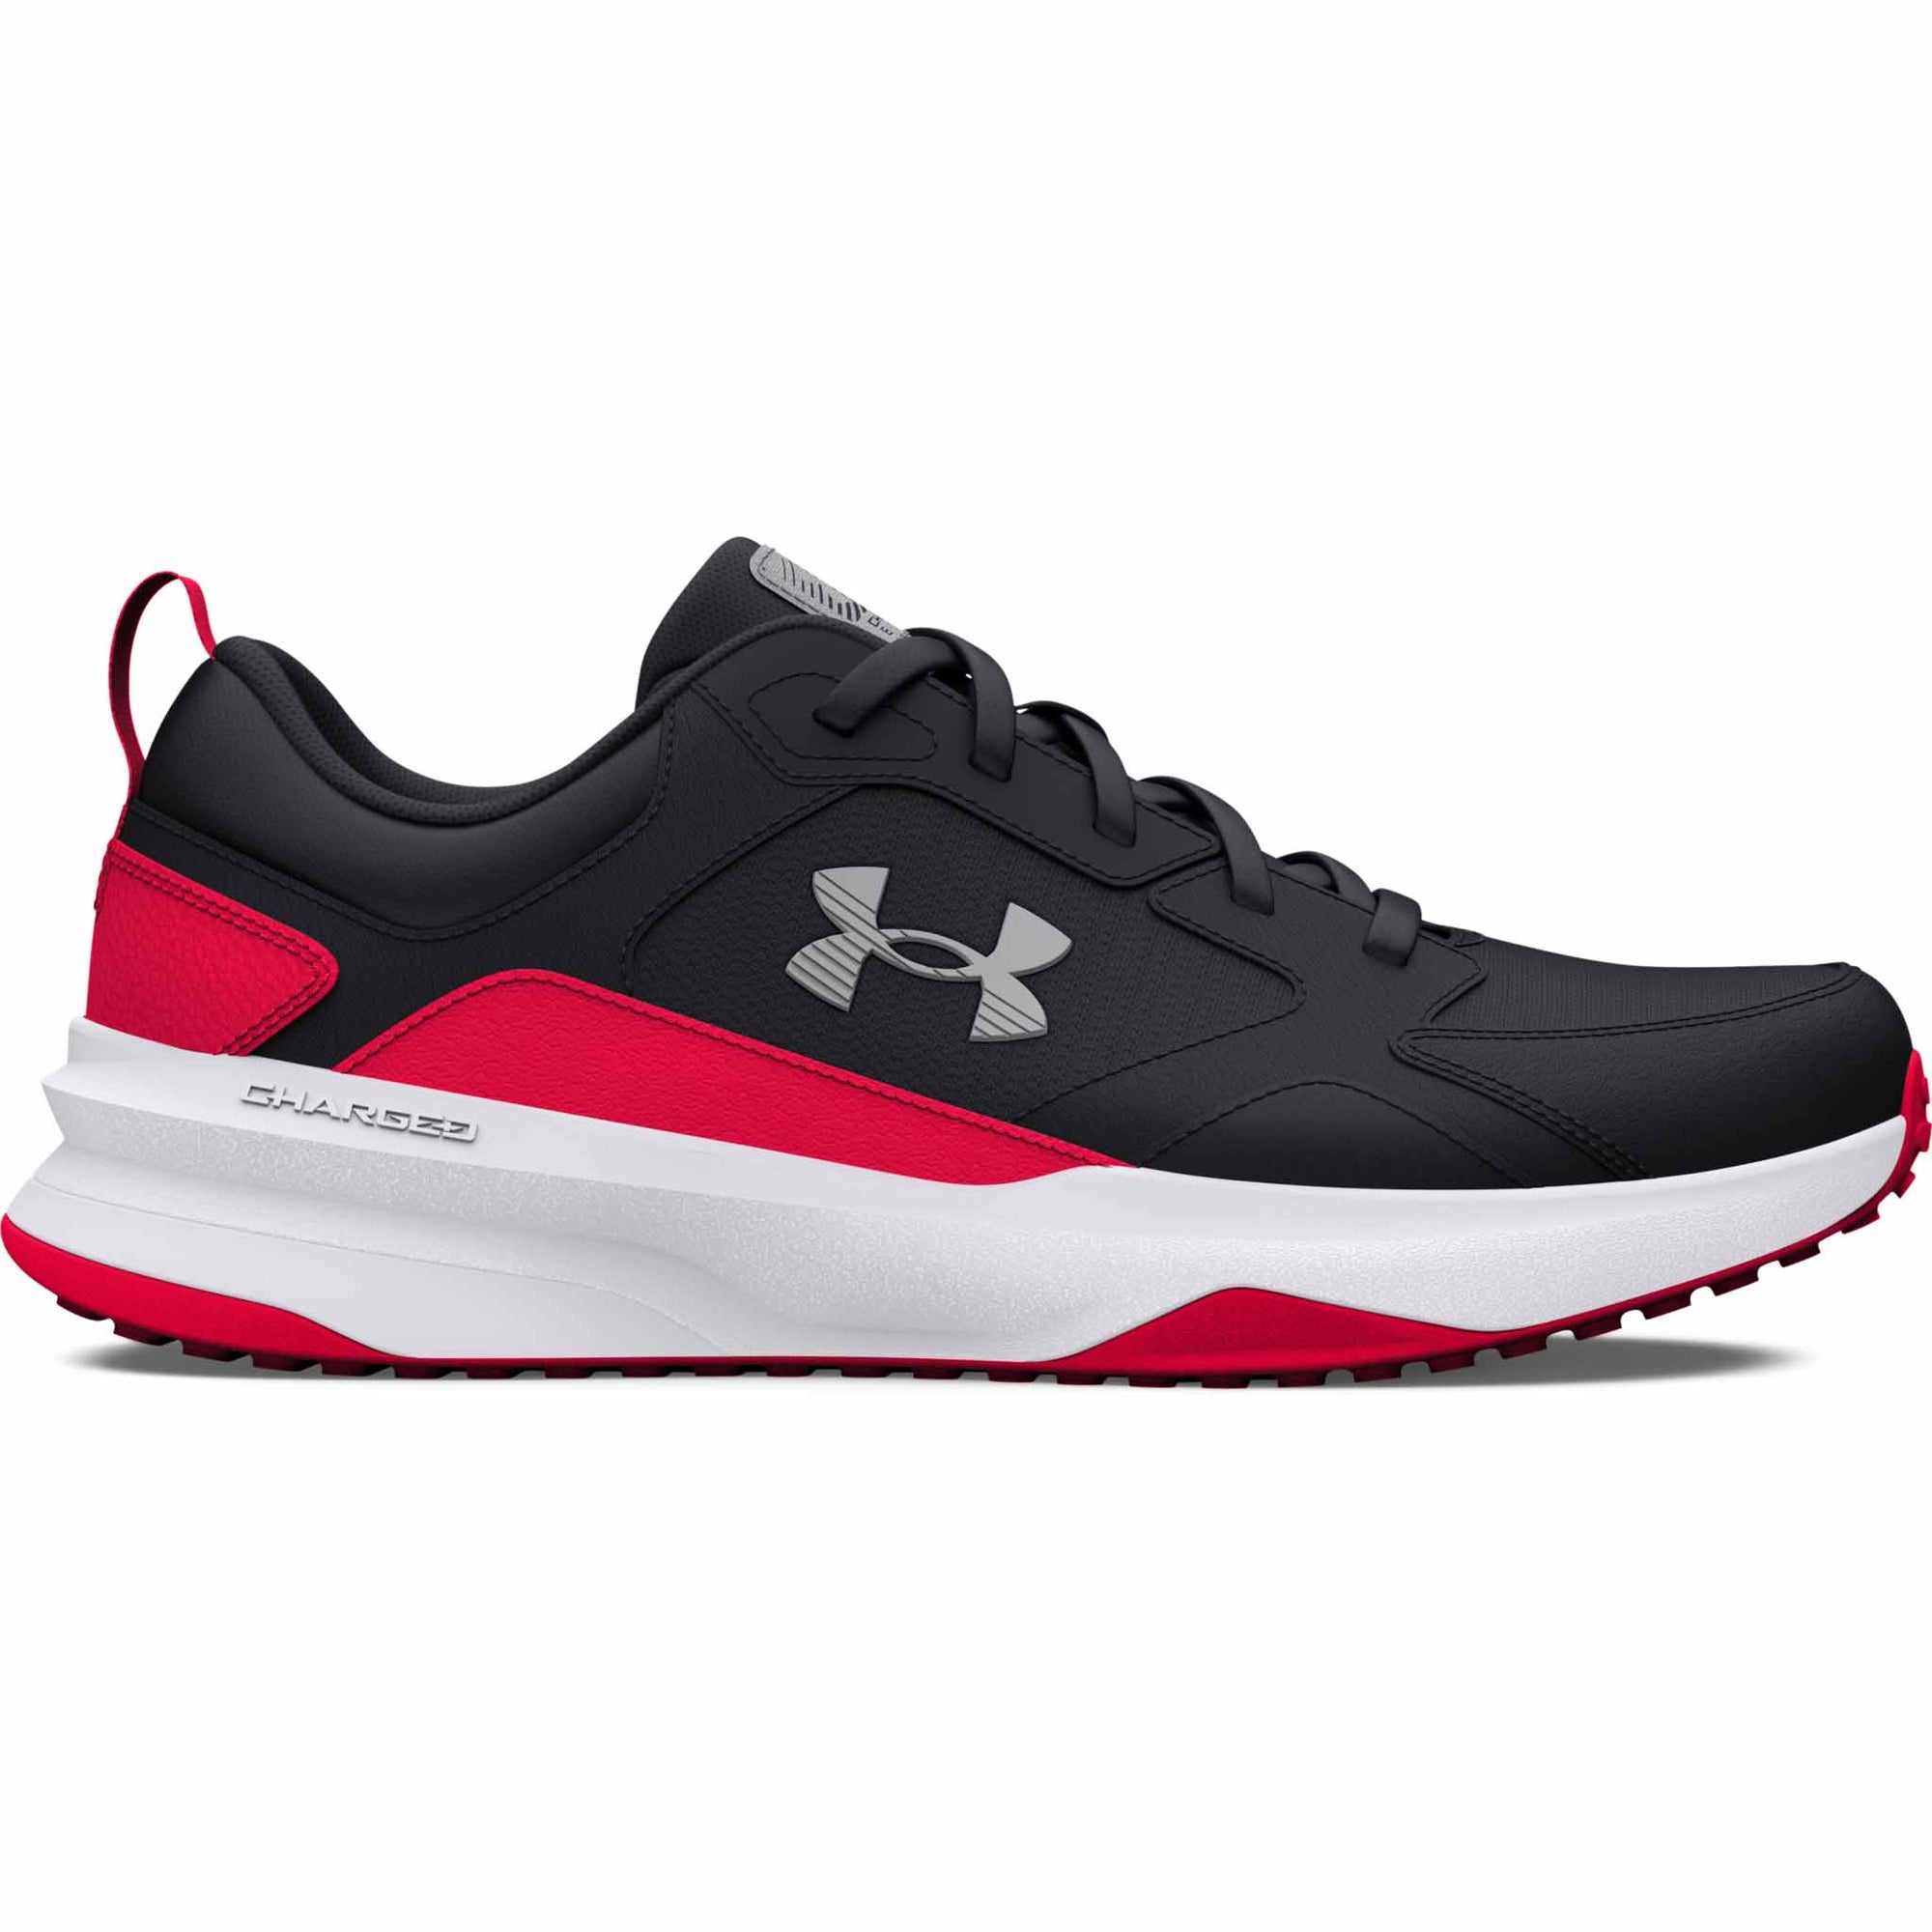 Under Armour Charged Edge chaussures d'entrainement sport homme - Black / Red